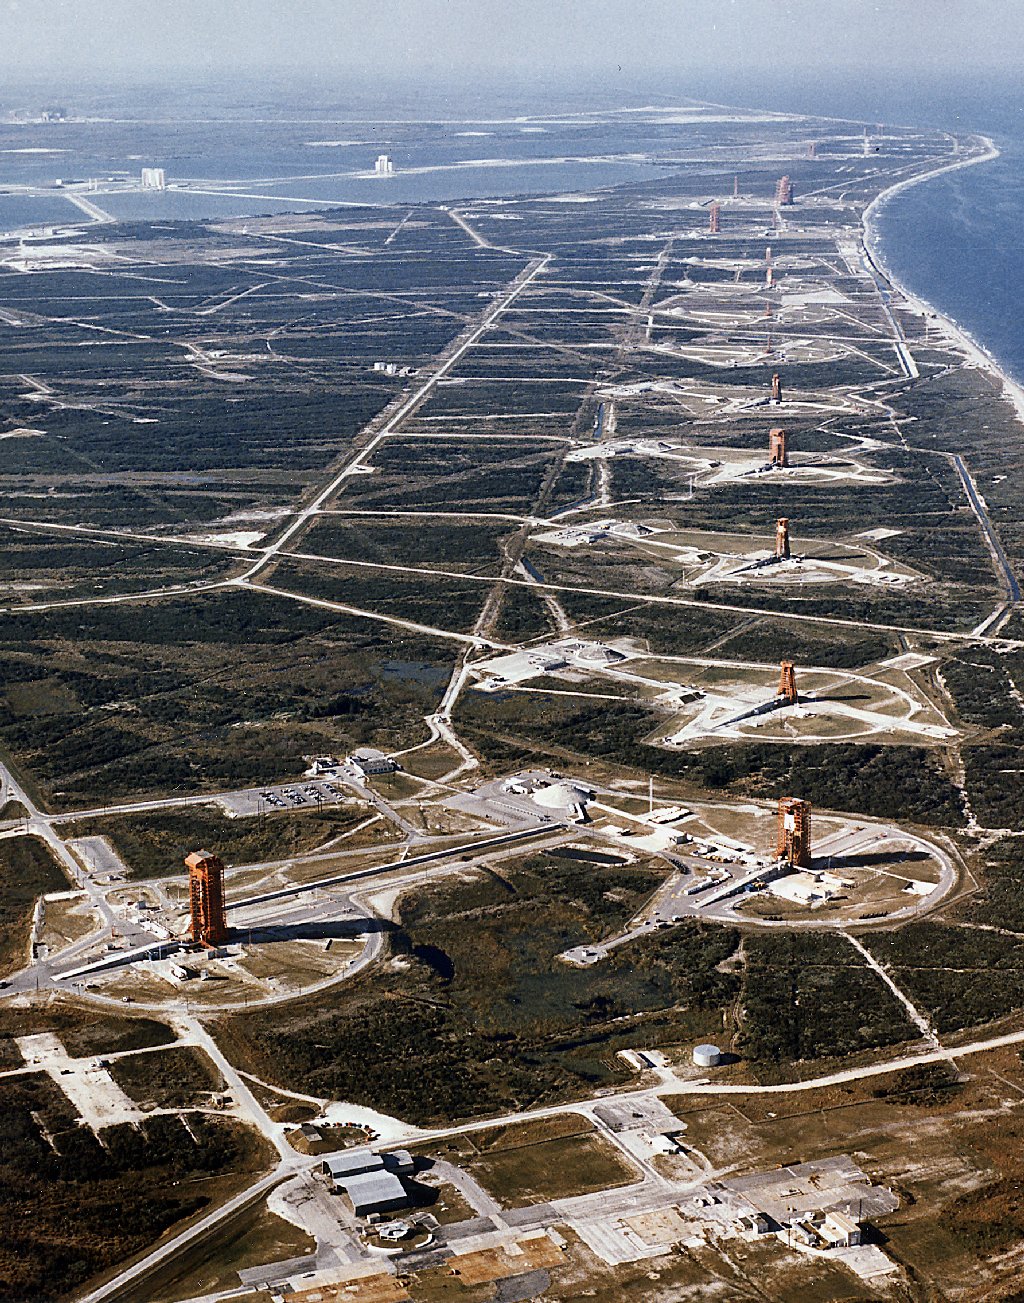 Cape_Canaveral_Air_Force_Station.jpg